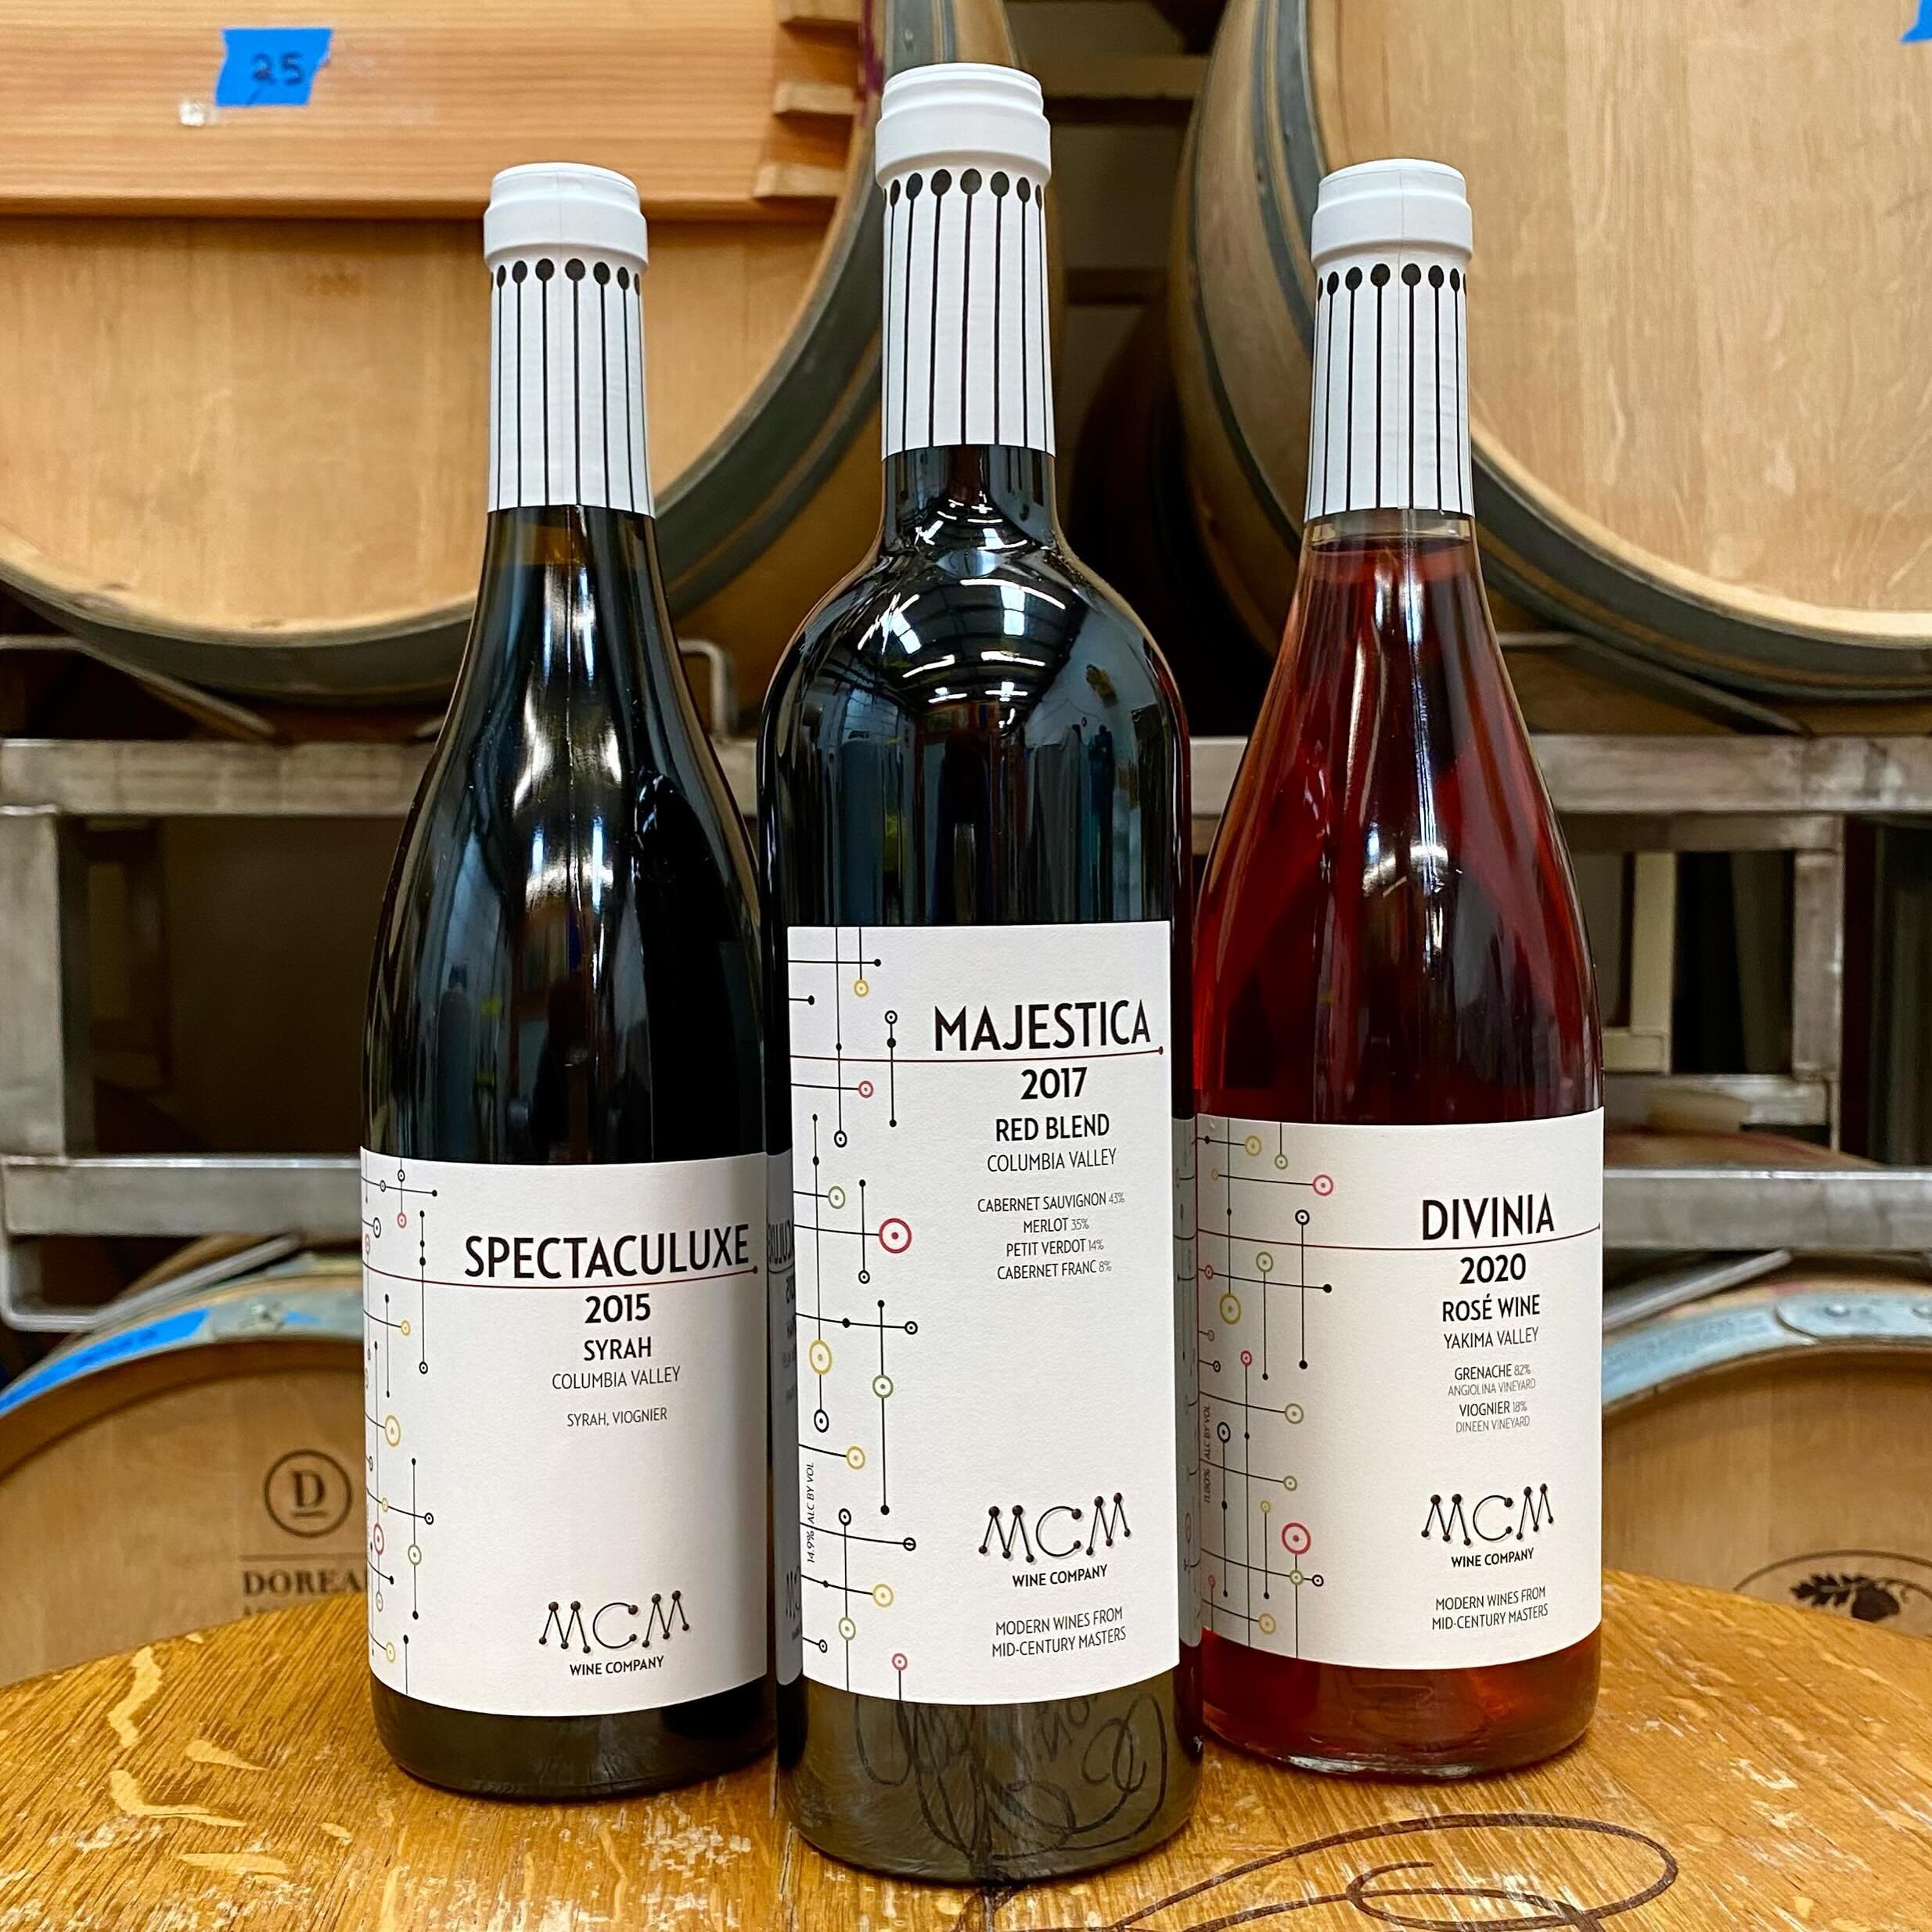 We&rsquo;re tasting out @mcmwineco wines this Thursday! This brand comes from the fine folks over at @notabenecellars - come by and say hi and try a few new wines! This Thursday 5-7:30pm 🍷

#winetasting #localwine #drinklocal #supportyourneighbors #